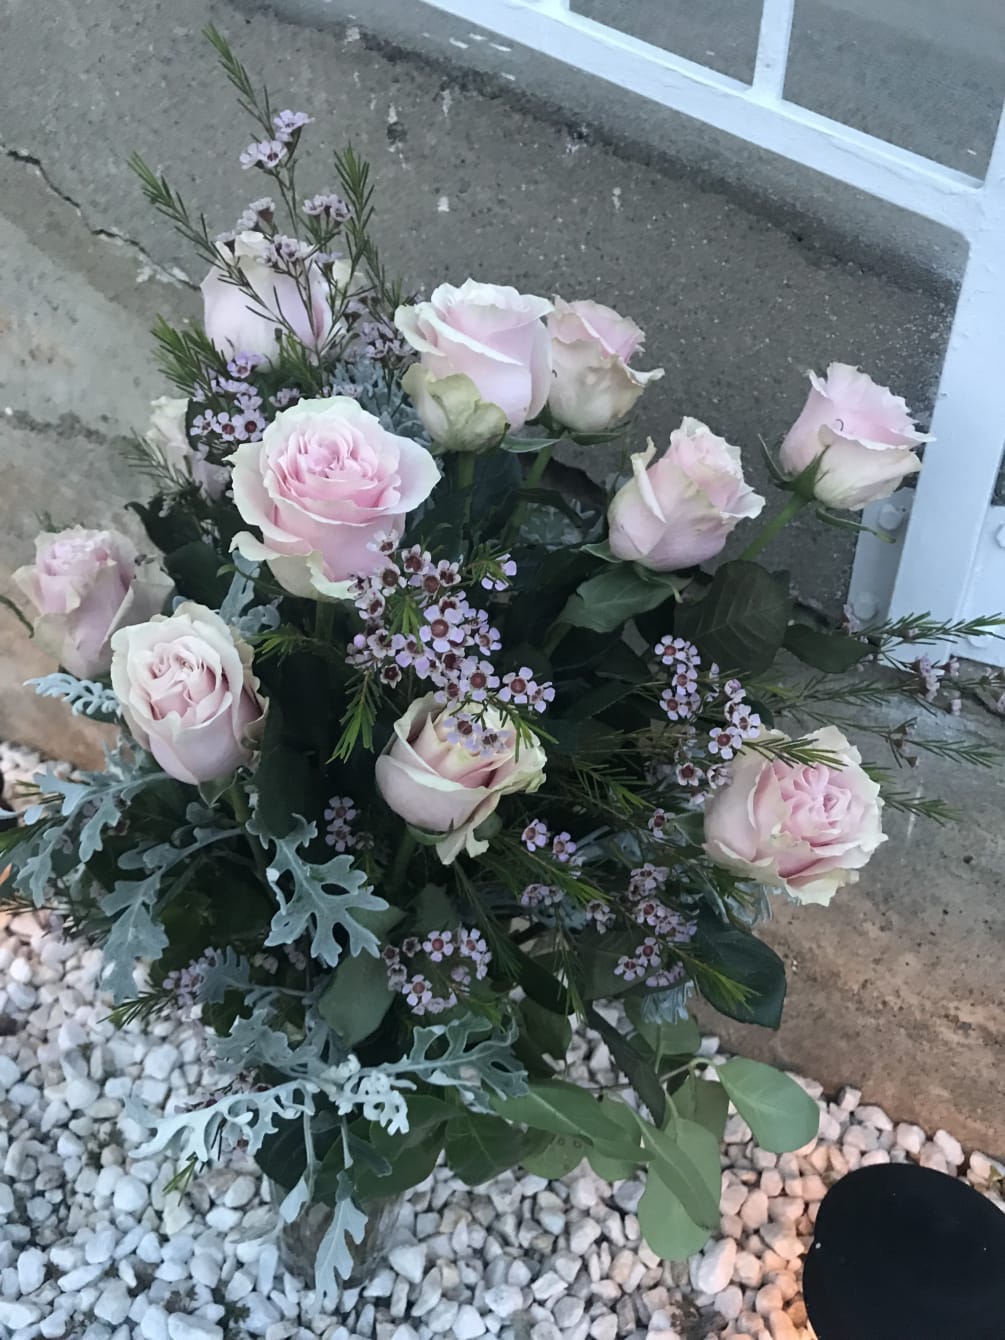 What a beautiful surprise. This bouquet with picture perfect soft pink roses